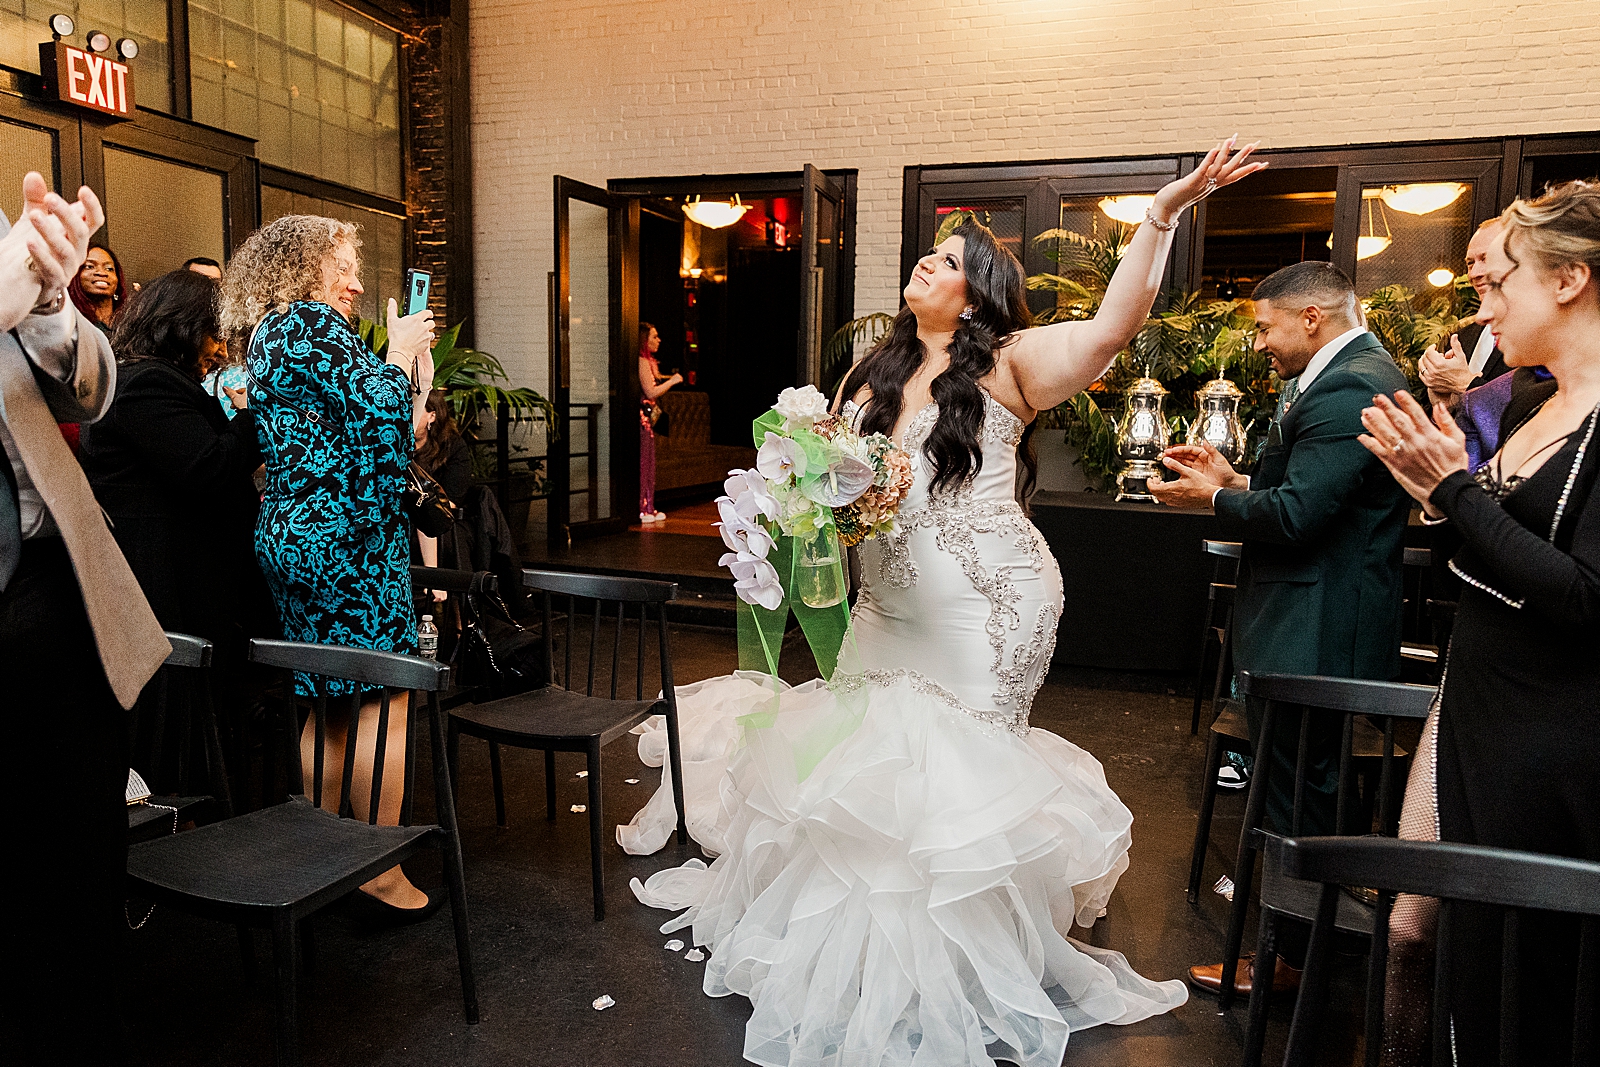 Shot of guests cheering as the bride makes her way down the aisle. 